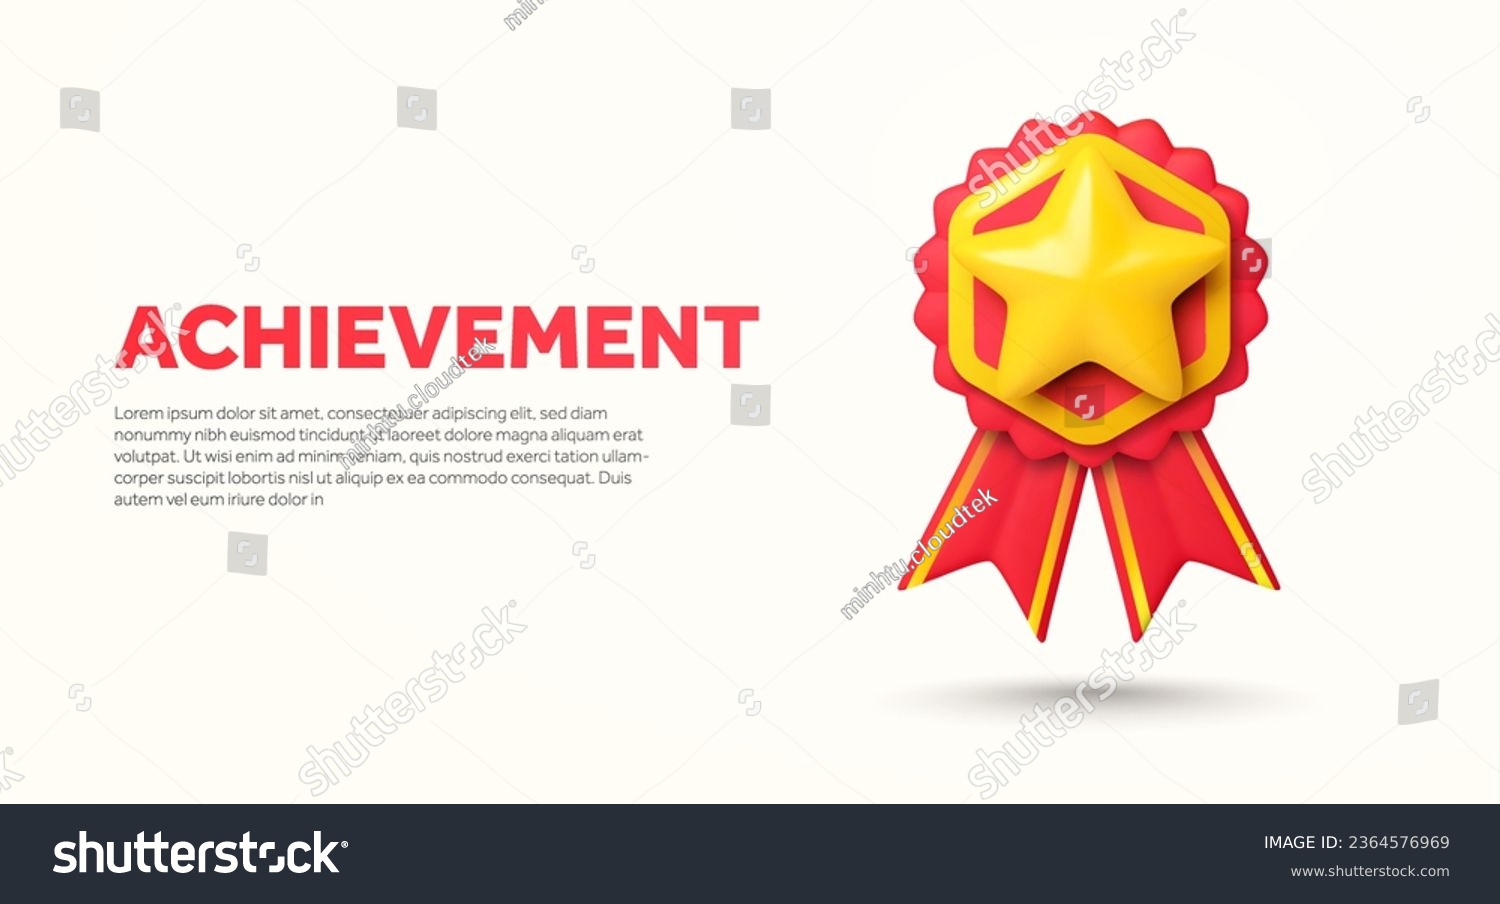 SVG of 3d achievement and success banner template with red medal and a golden star on it. Competition landing page concept. 3d rendered premium medal icon isolated on background. 3d vector illustration. svg